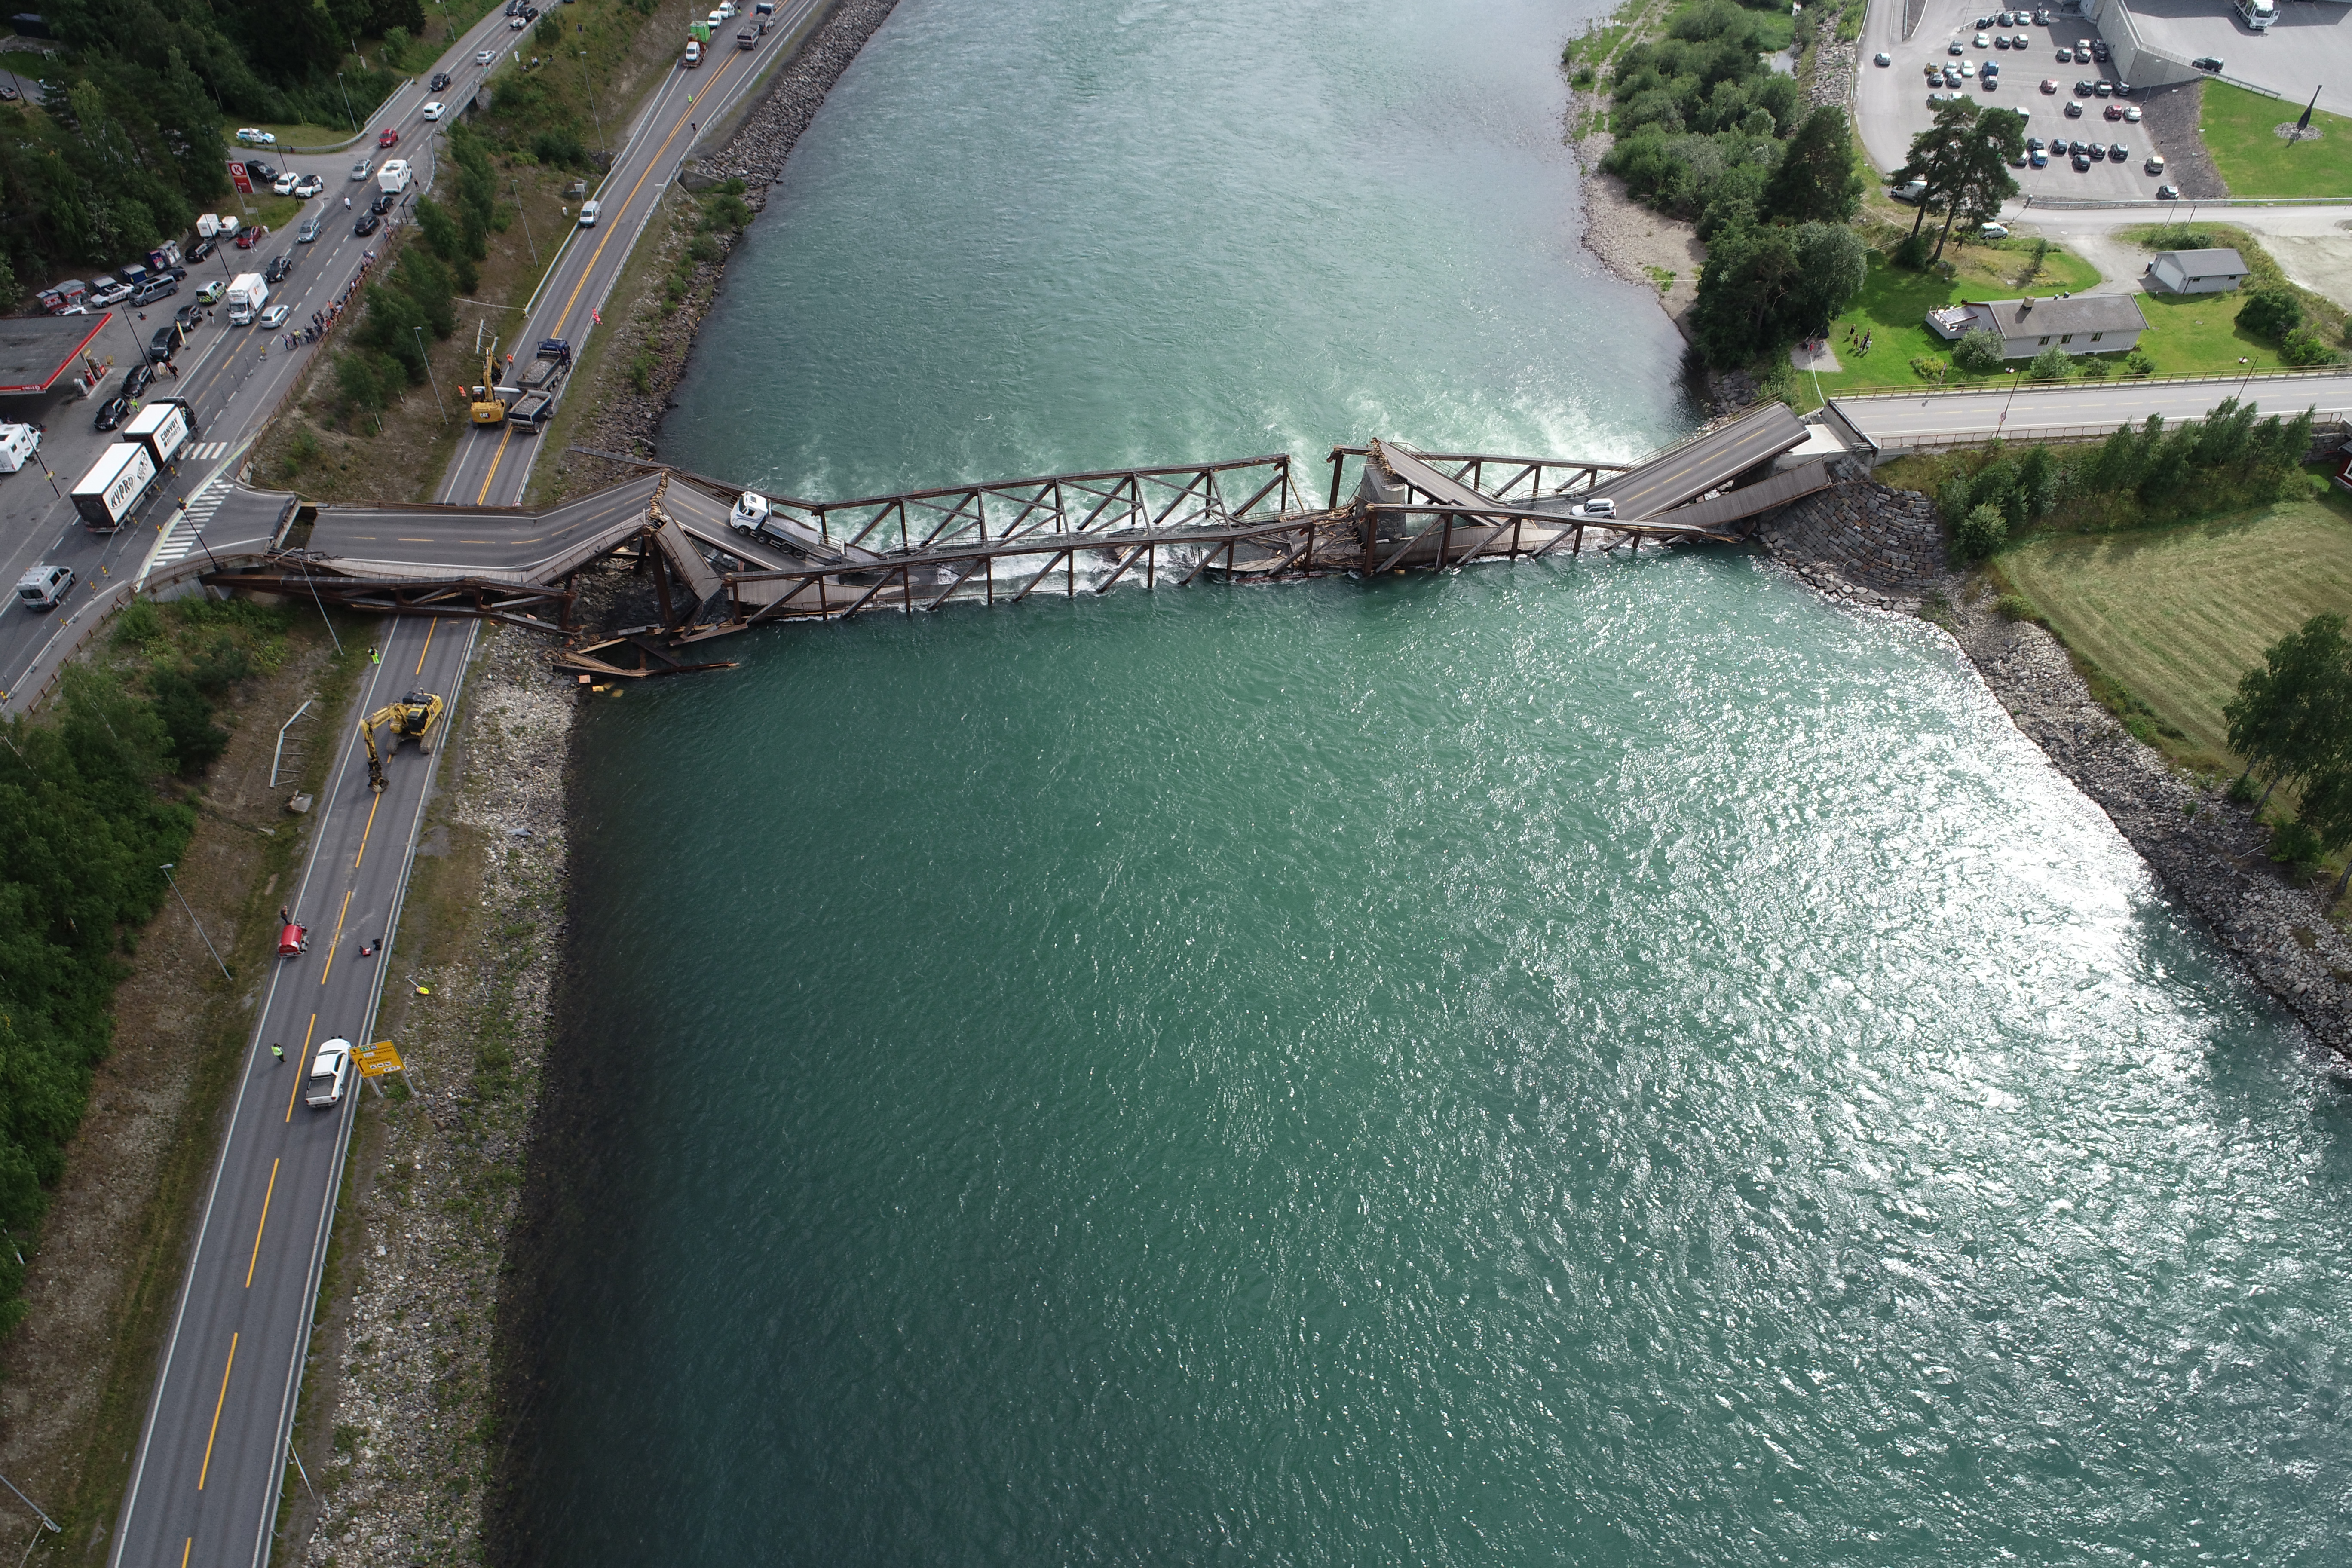 Results released from preliminary study into collapsed Norwegian bridge image